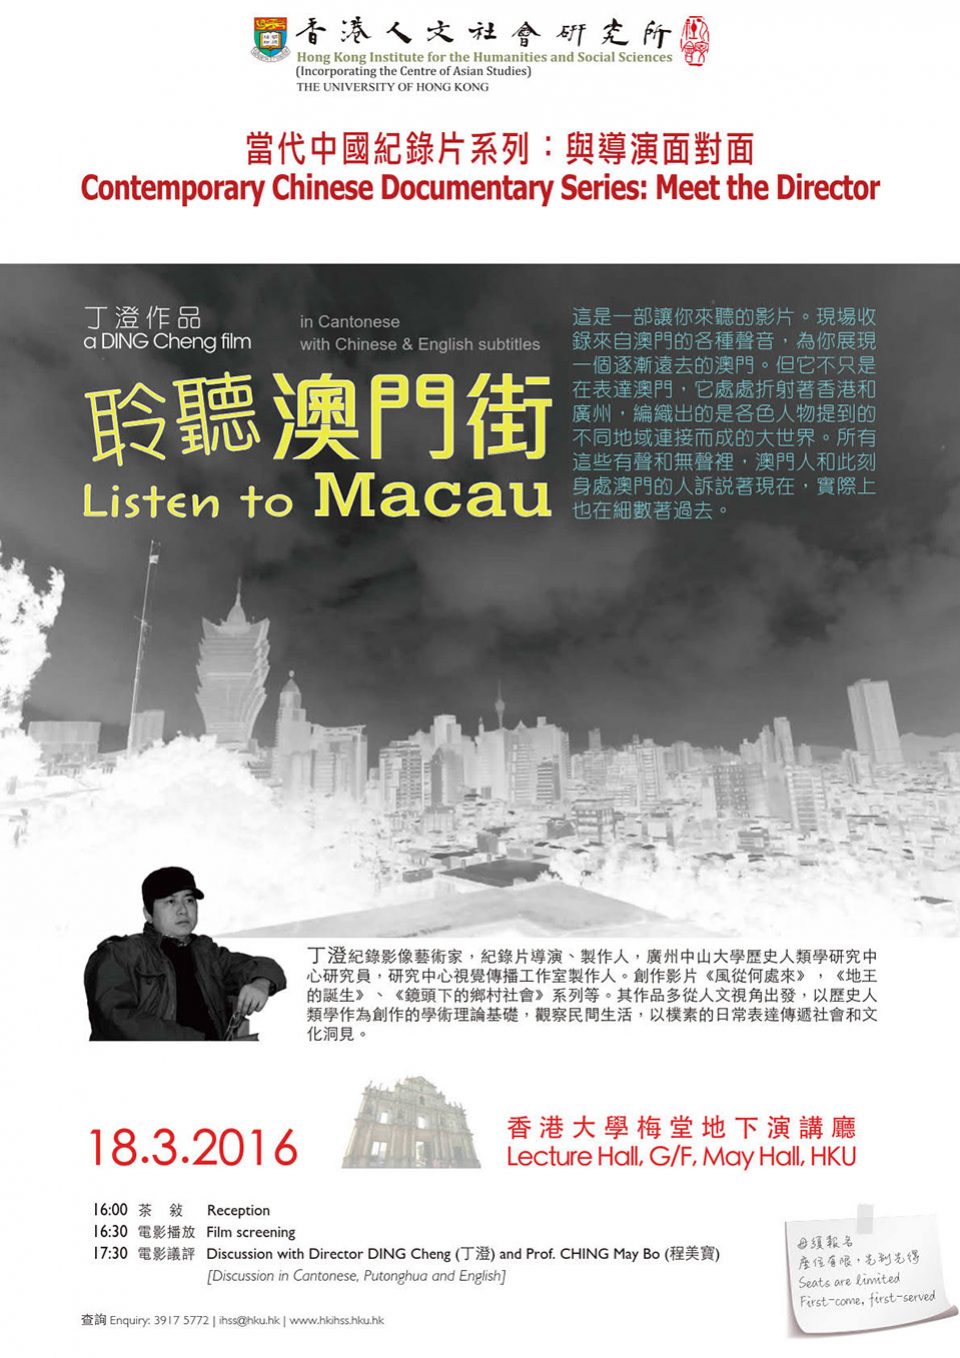 Contemporary Chinese Documentary Series: Meet the Director “Listen to Macau”《聆聽澳門街》 by Director Cheng Ding (March 18, 2016)